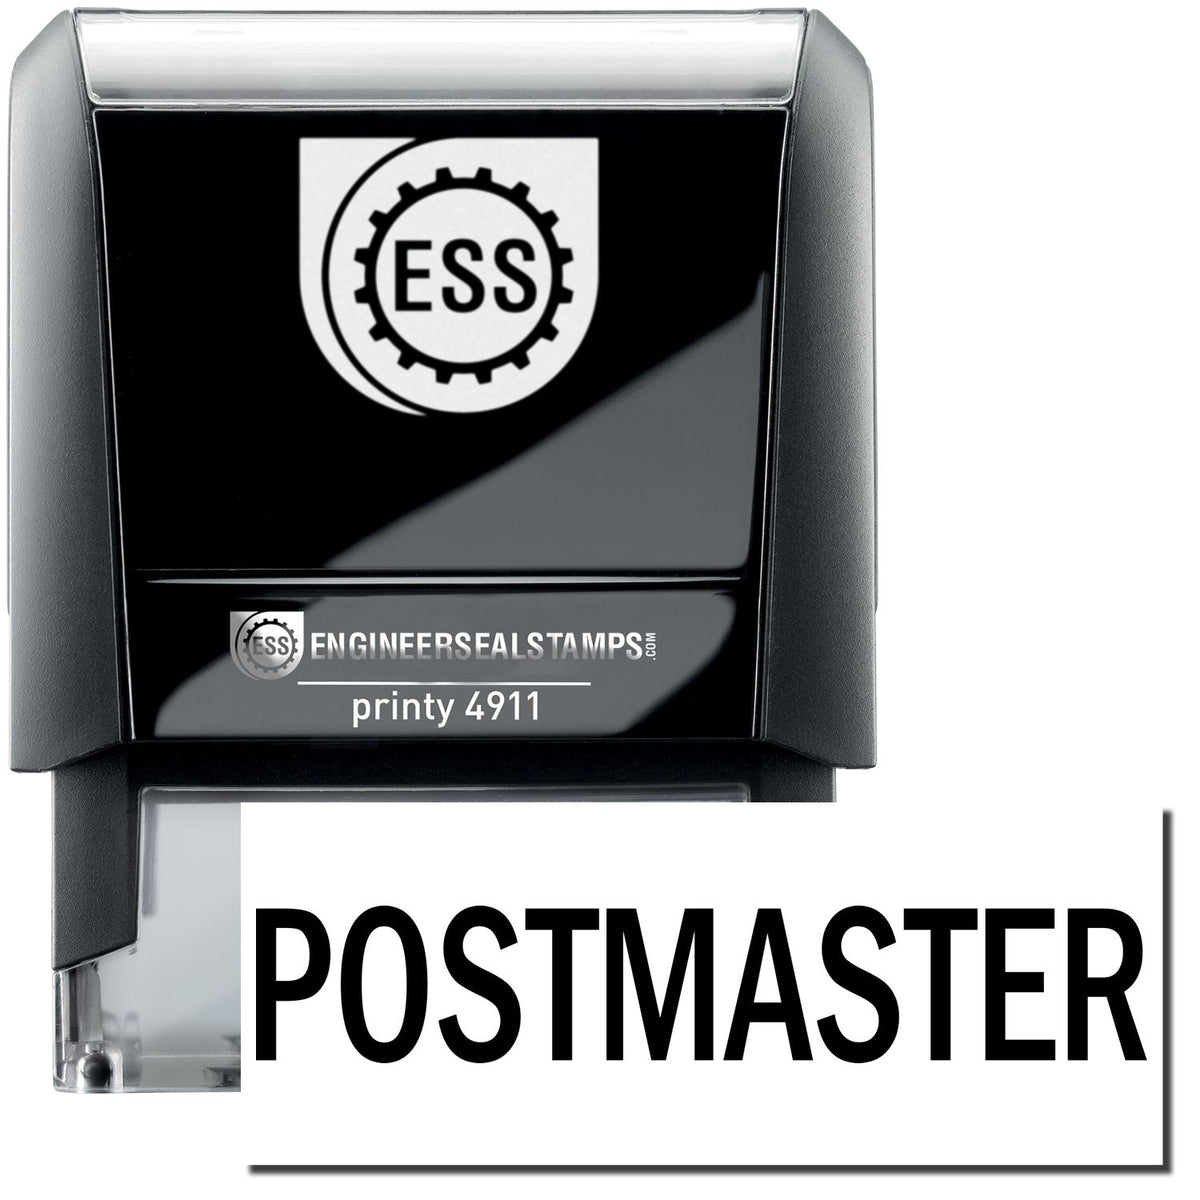 A self-inking stamp with a stamped image showing how the text &quot;POSTMASTER&quot; is displayed after stamping.